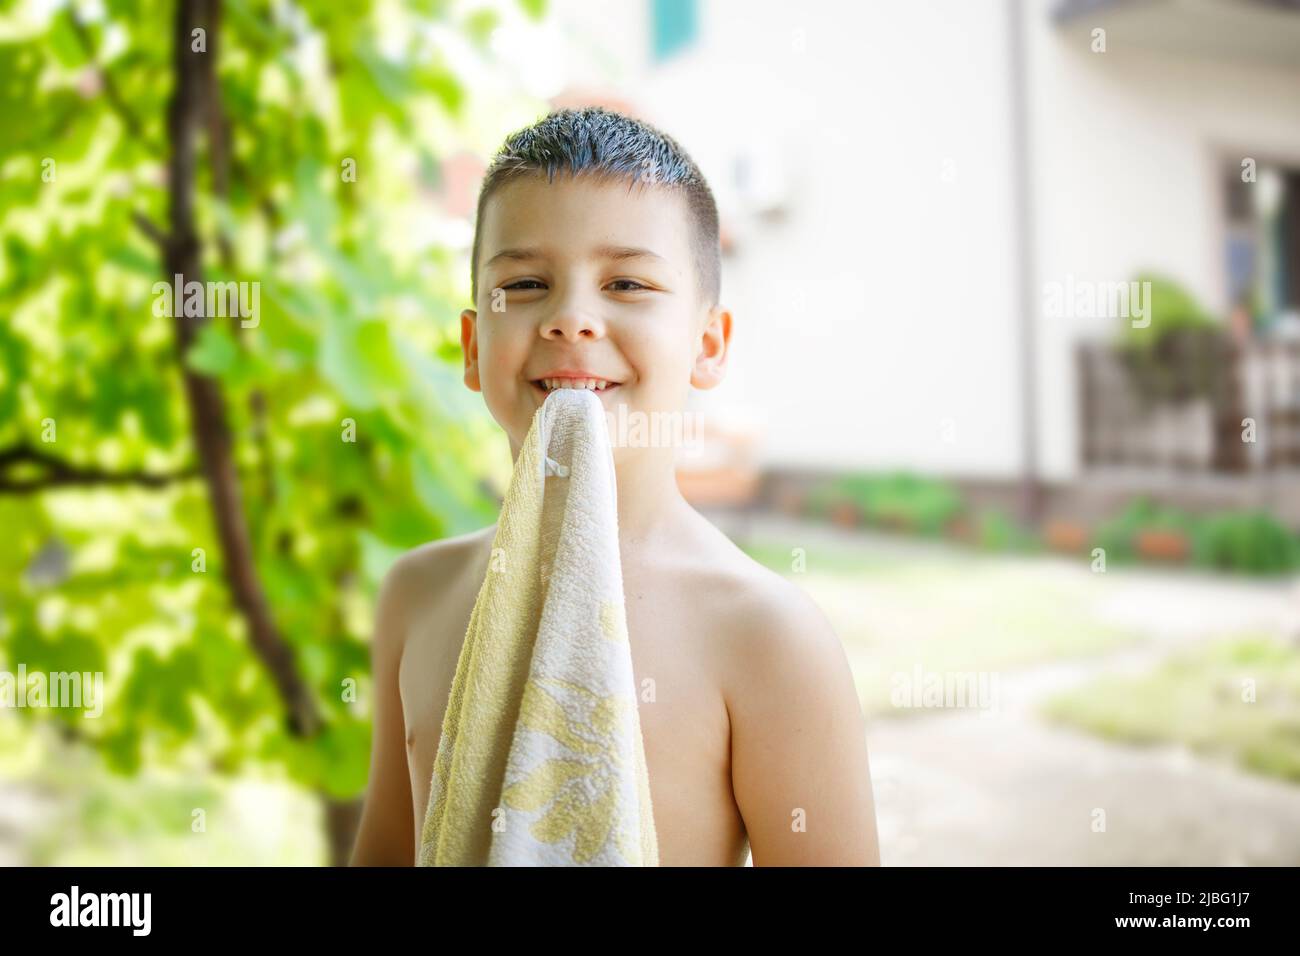 Young boy goofing around with a towel on a hot summer day Stock Photo